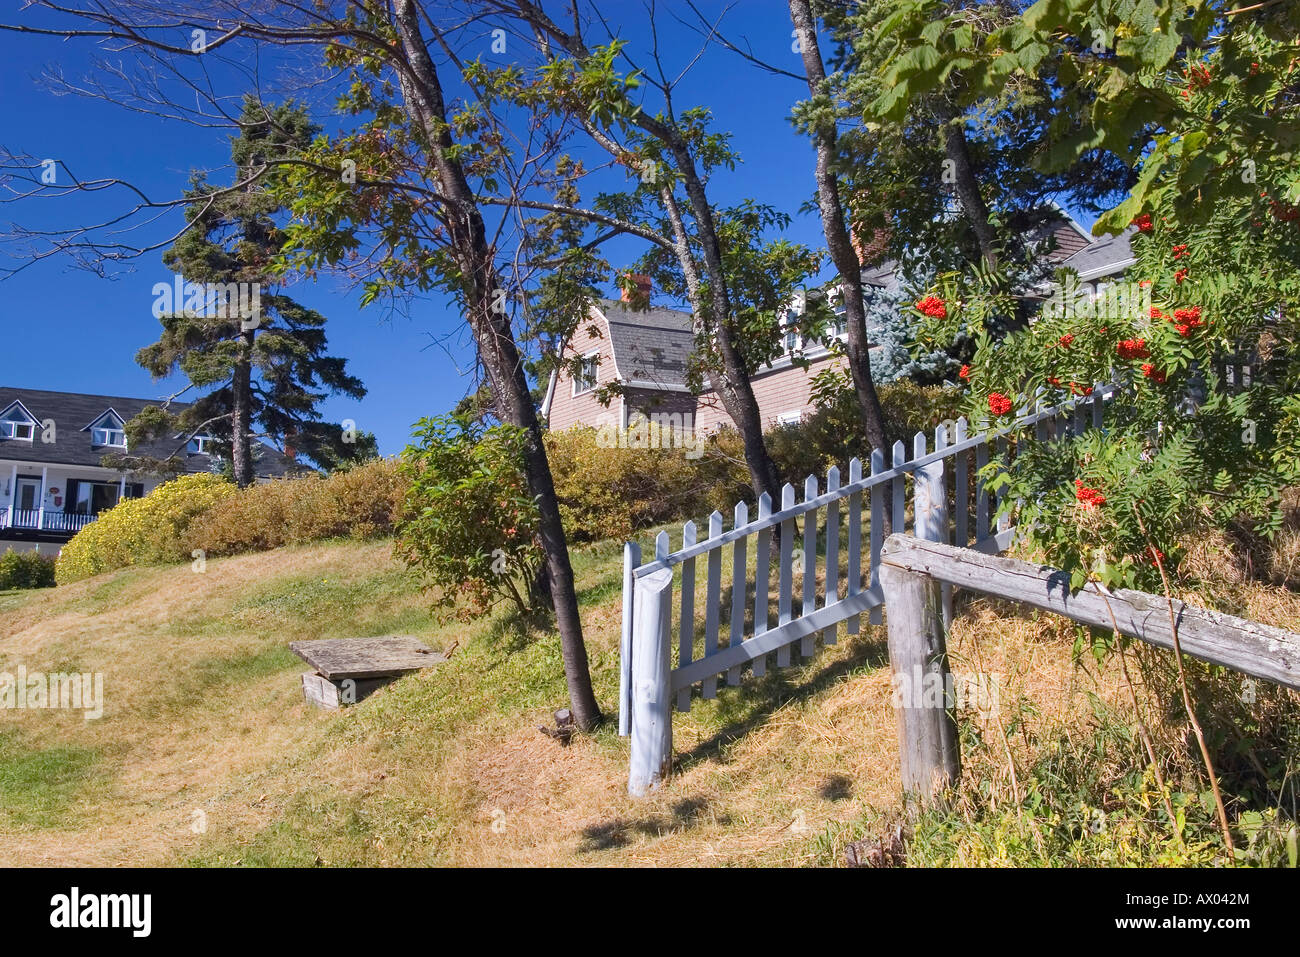 Sorbus trees with red fruits and old fence on private property at Tadoussac Stock Photo